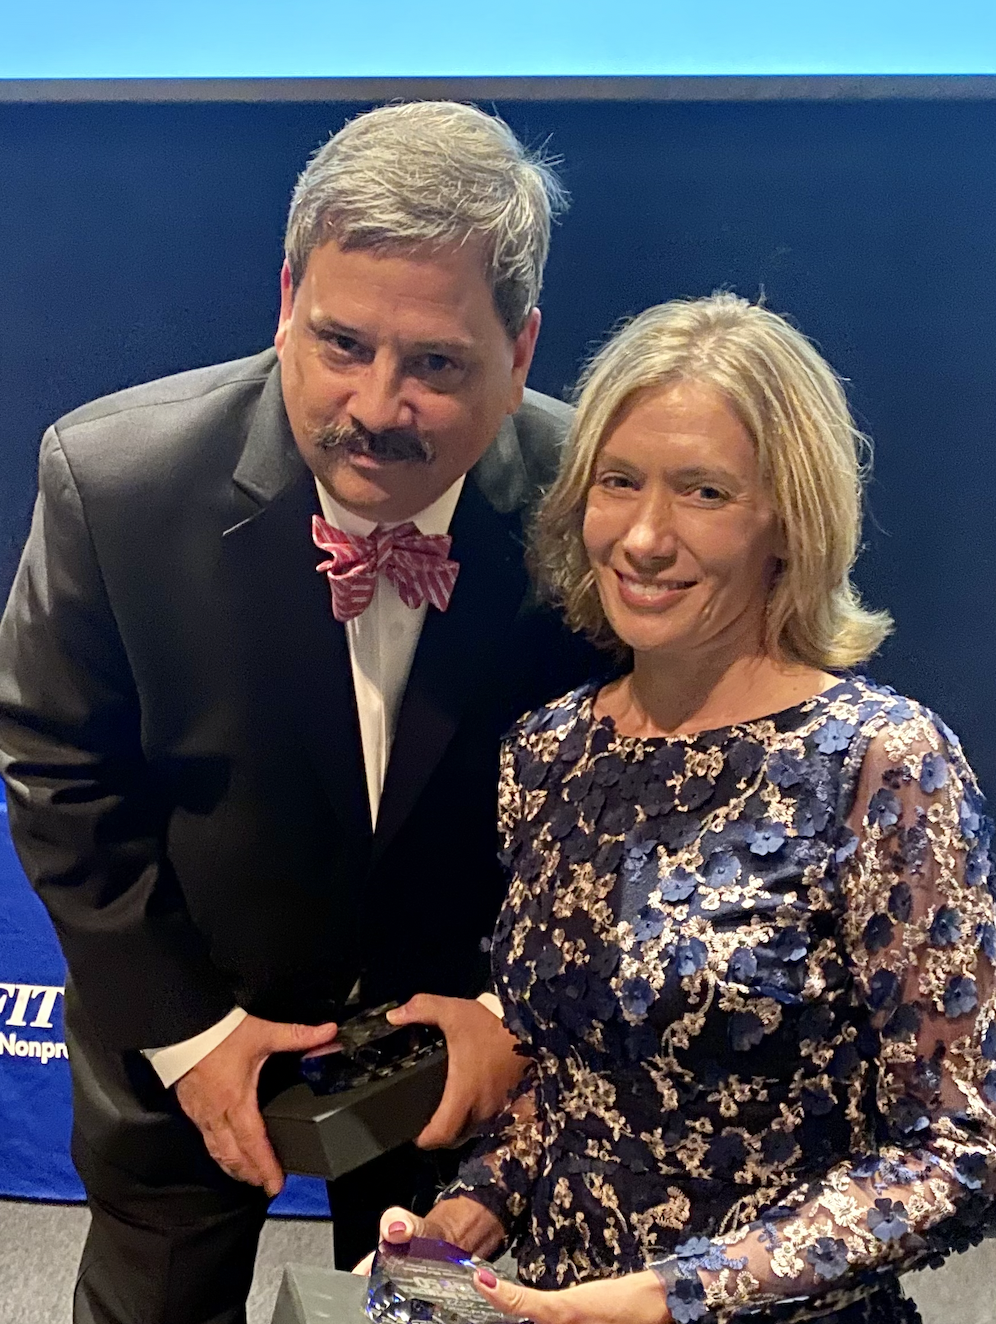 Award recipient Shannon McCracken, CEO of The Nonprofit Alliance, with Paul Clolery, Vice President & Editorial Director at The NonProfit Times Publishing Group